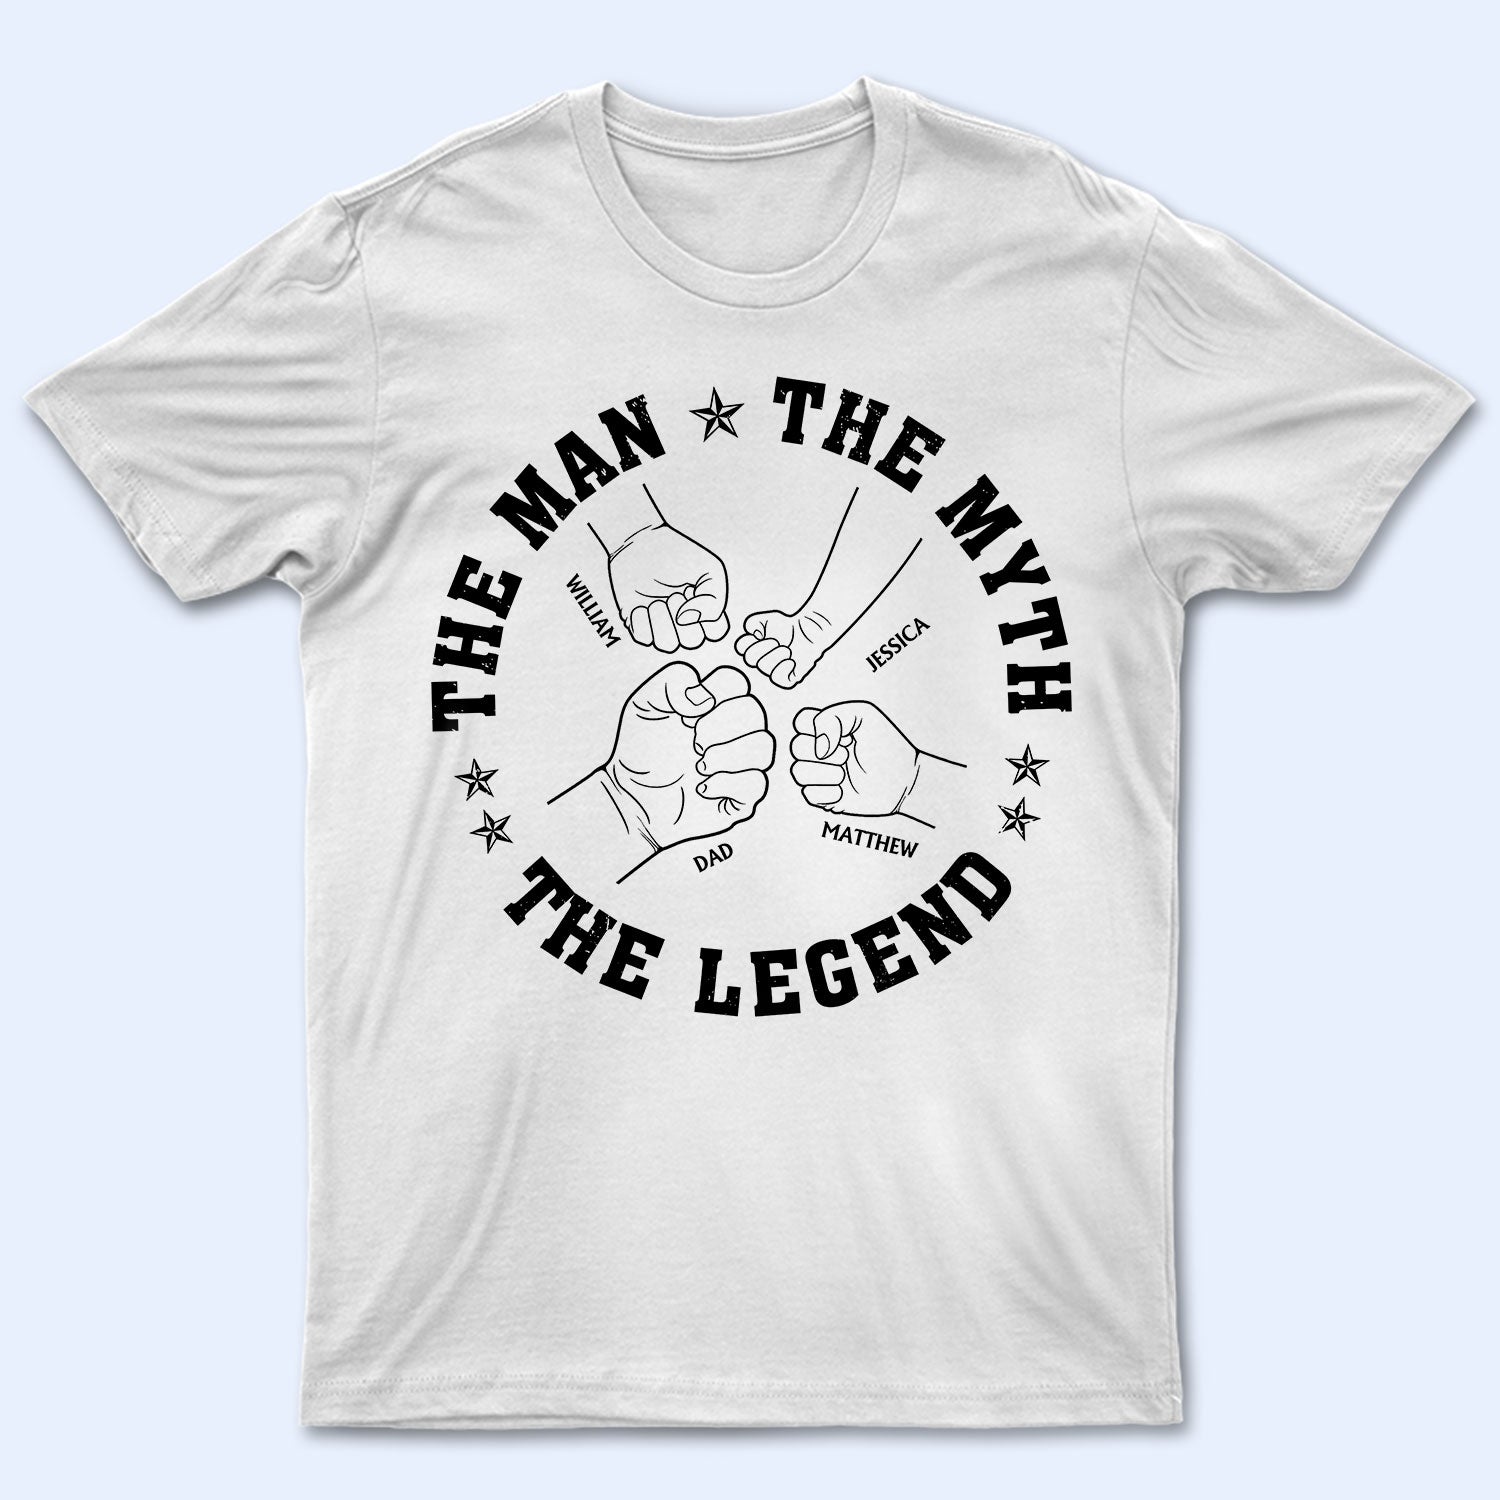 Dad Grandpa The Man The Myth The Legend - Personalized T Shirt